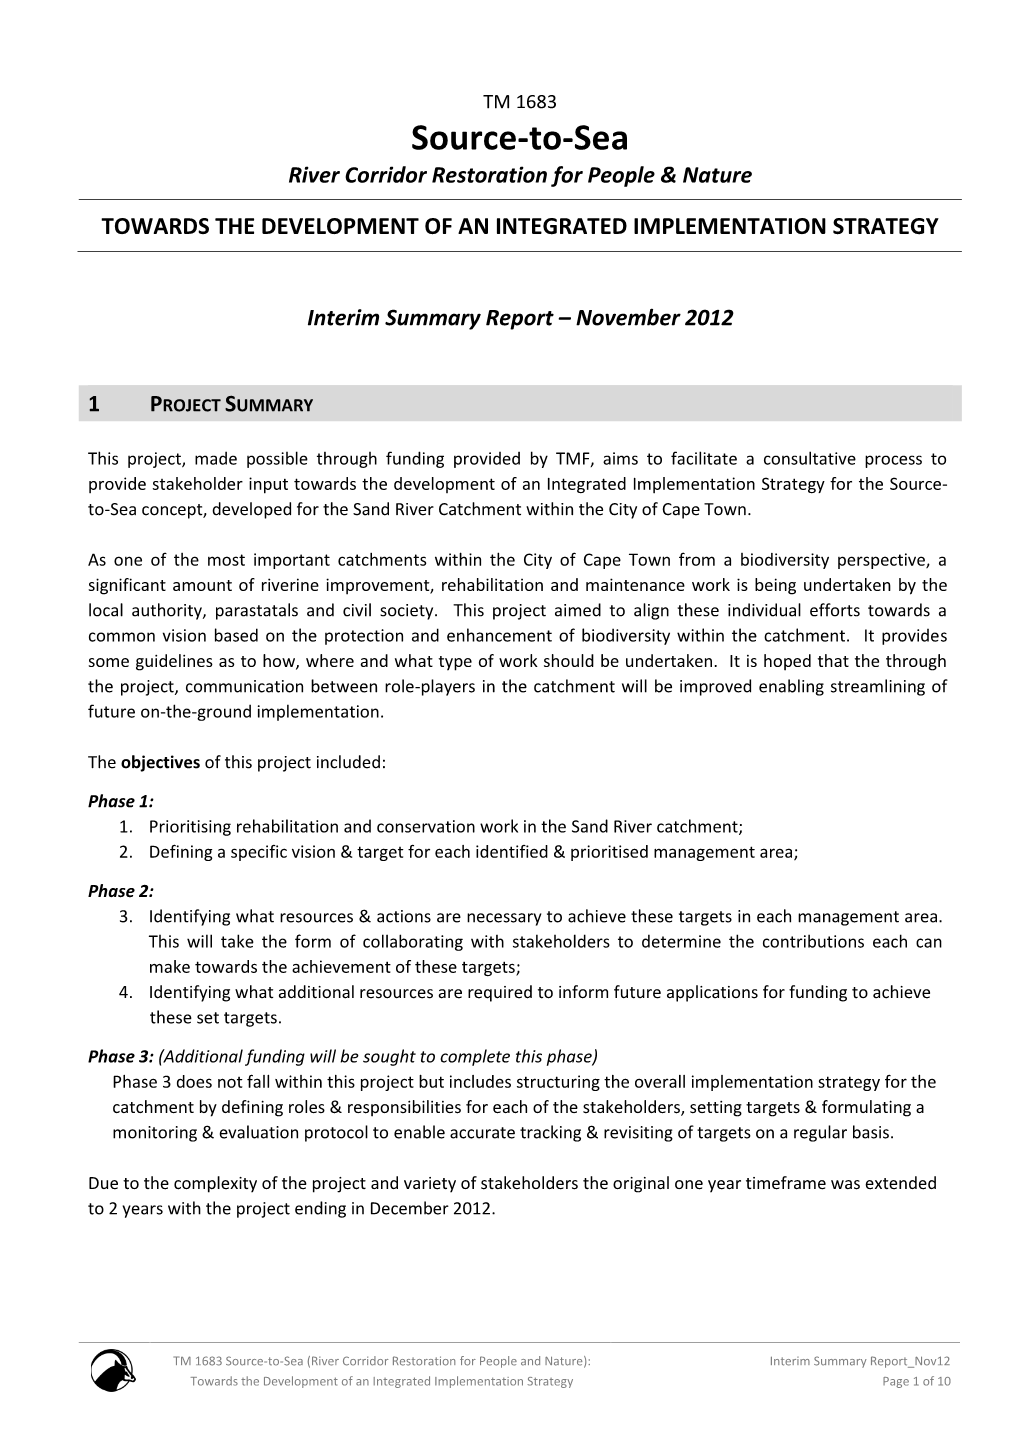 Input Towards the Development of an Integrated Implementation Strategy